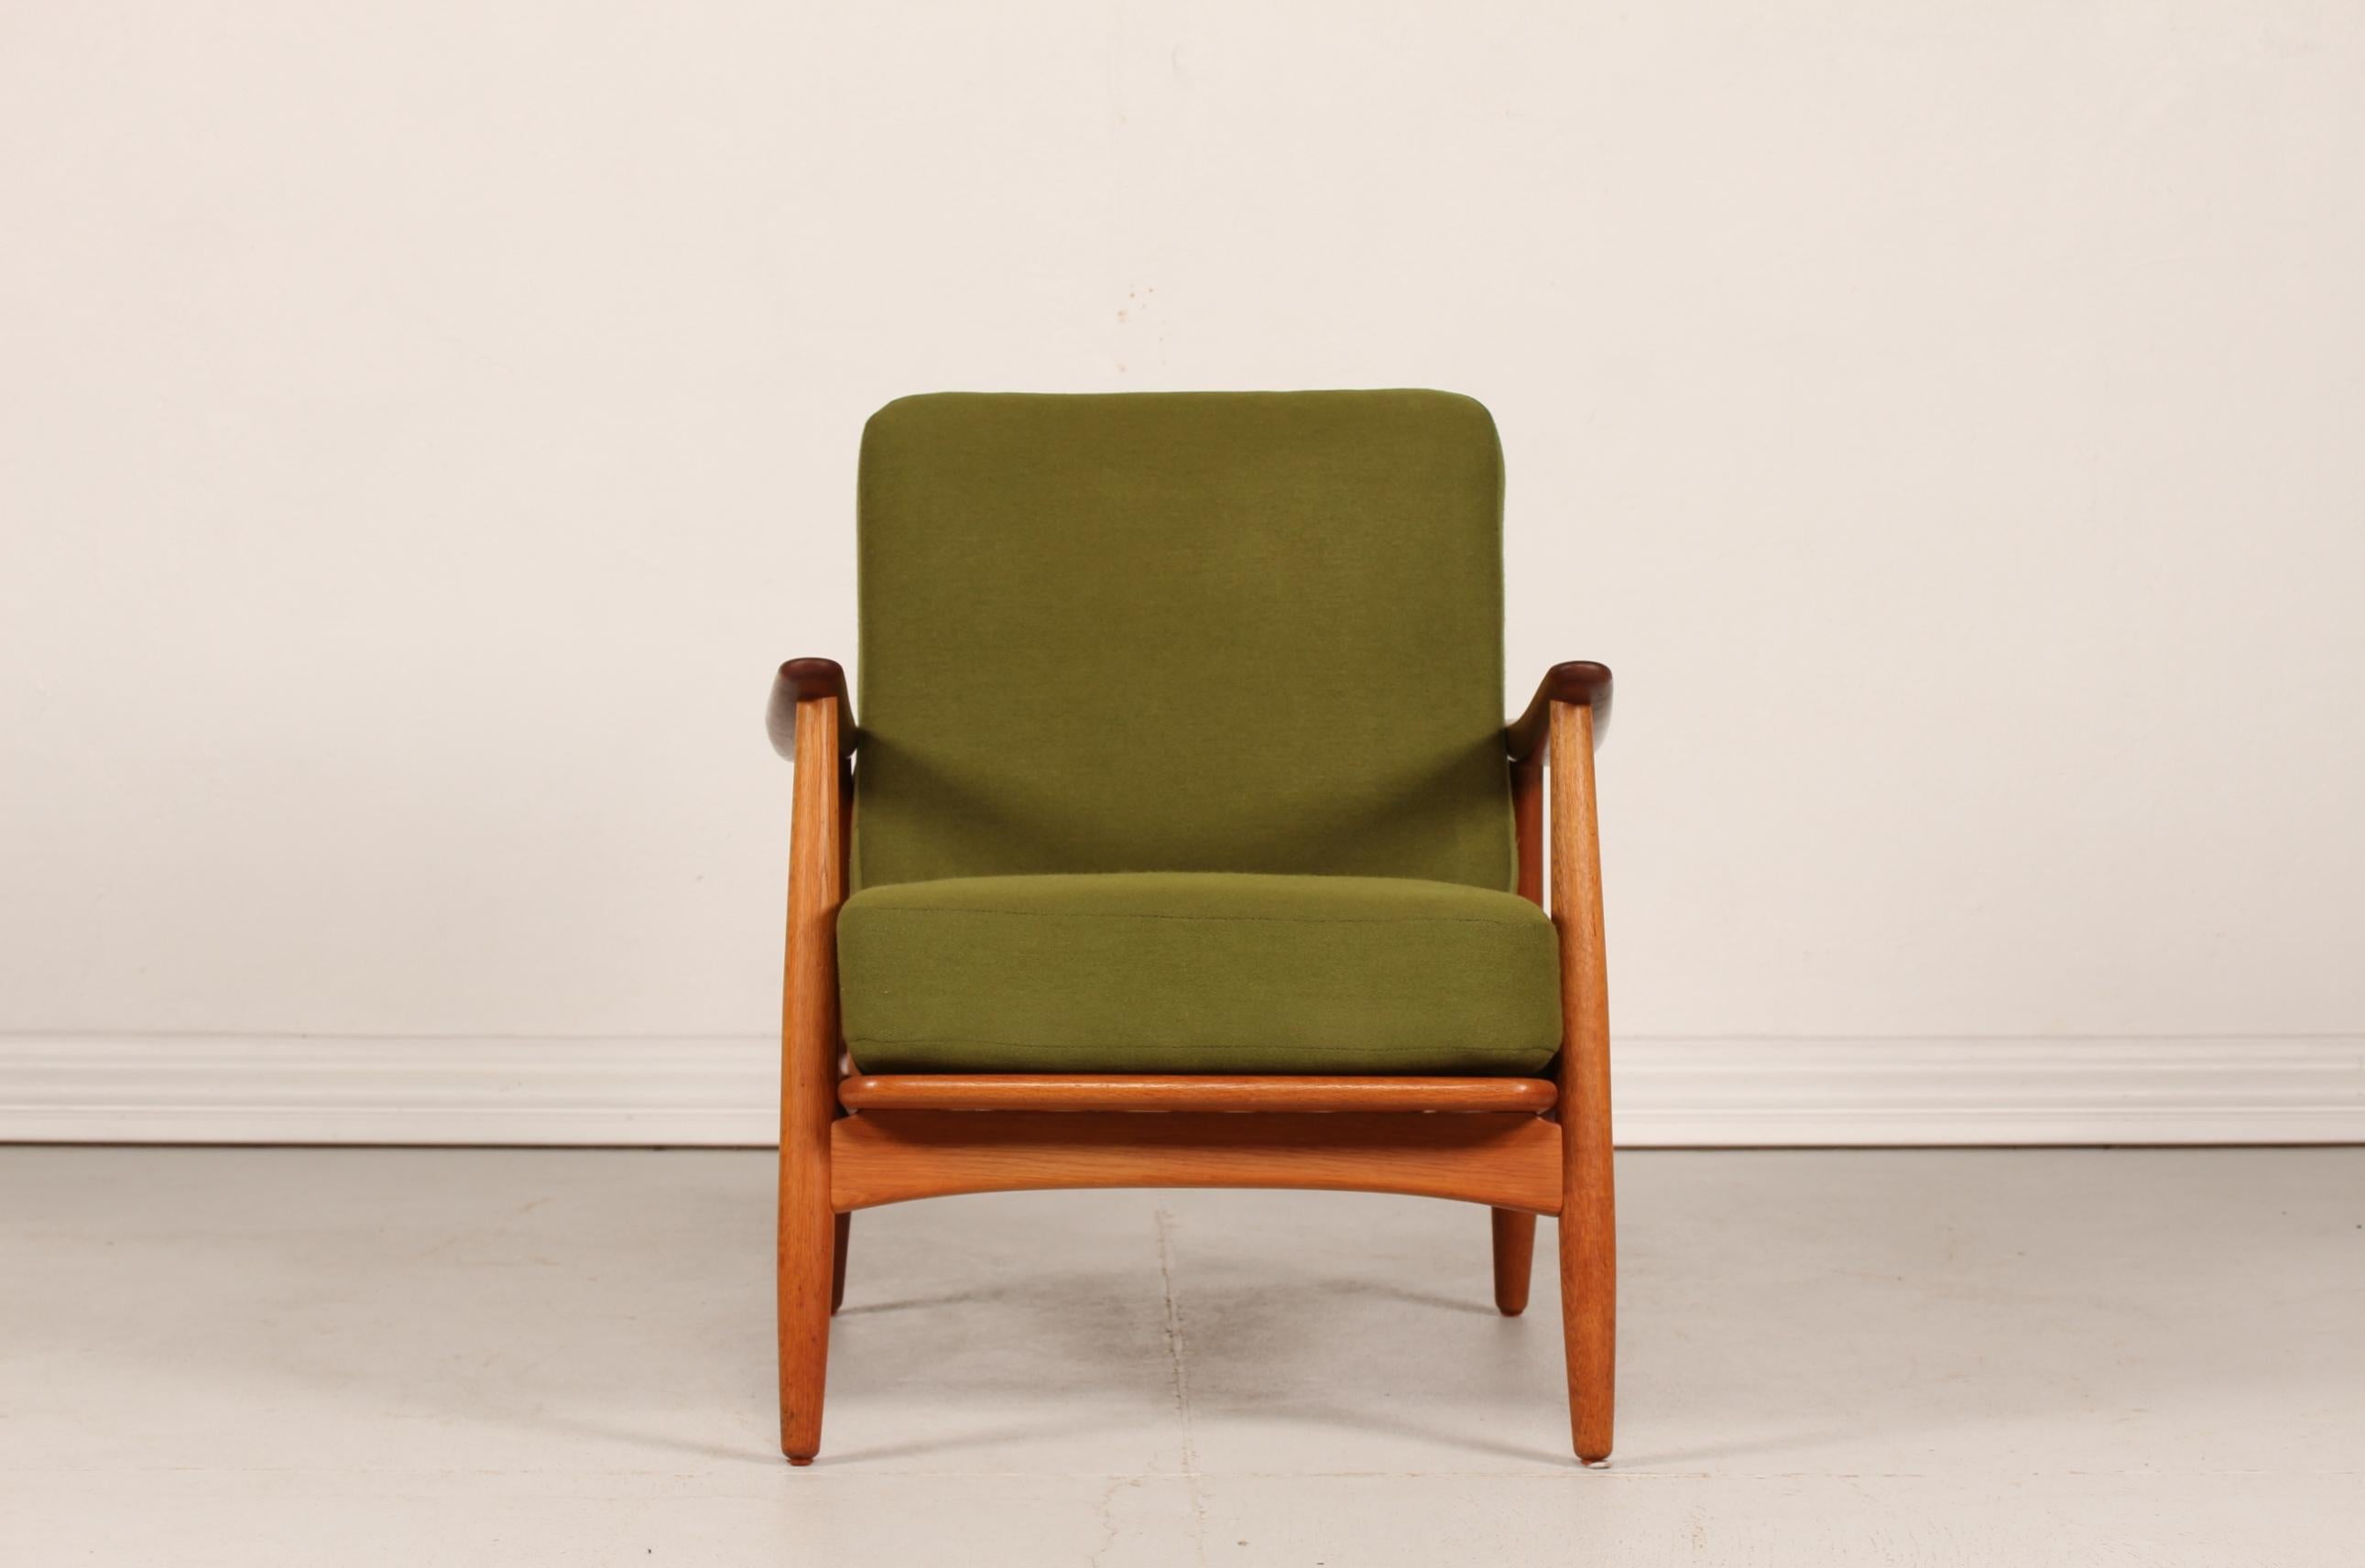 Easy chair model 121 after Johannes Andersens design (1903-1995) made by Københavns Madrasfabrik.
The frame is made of oak with teak armrests and the old and original cushions are upholstered with green fabric.